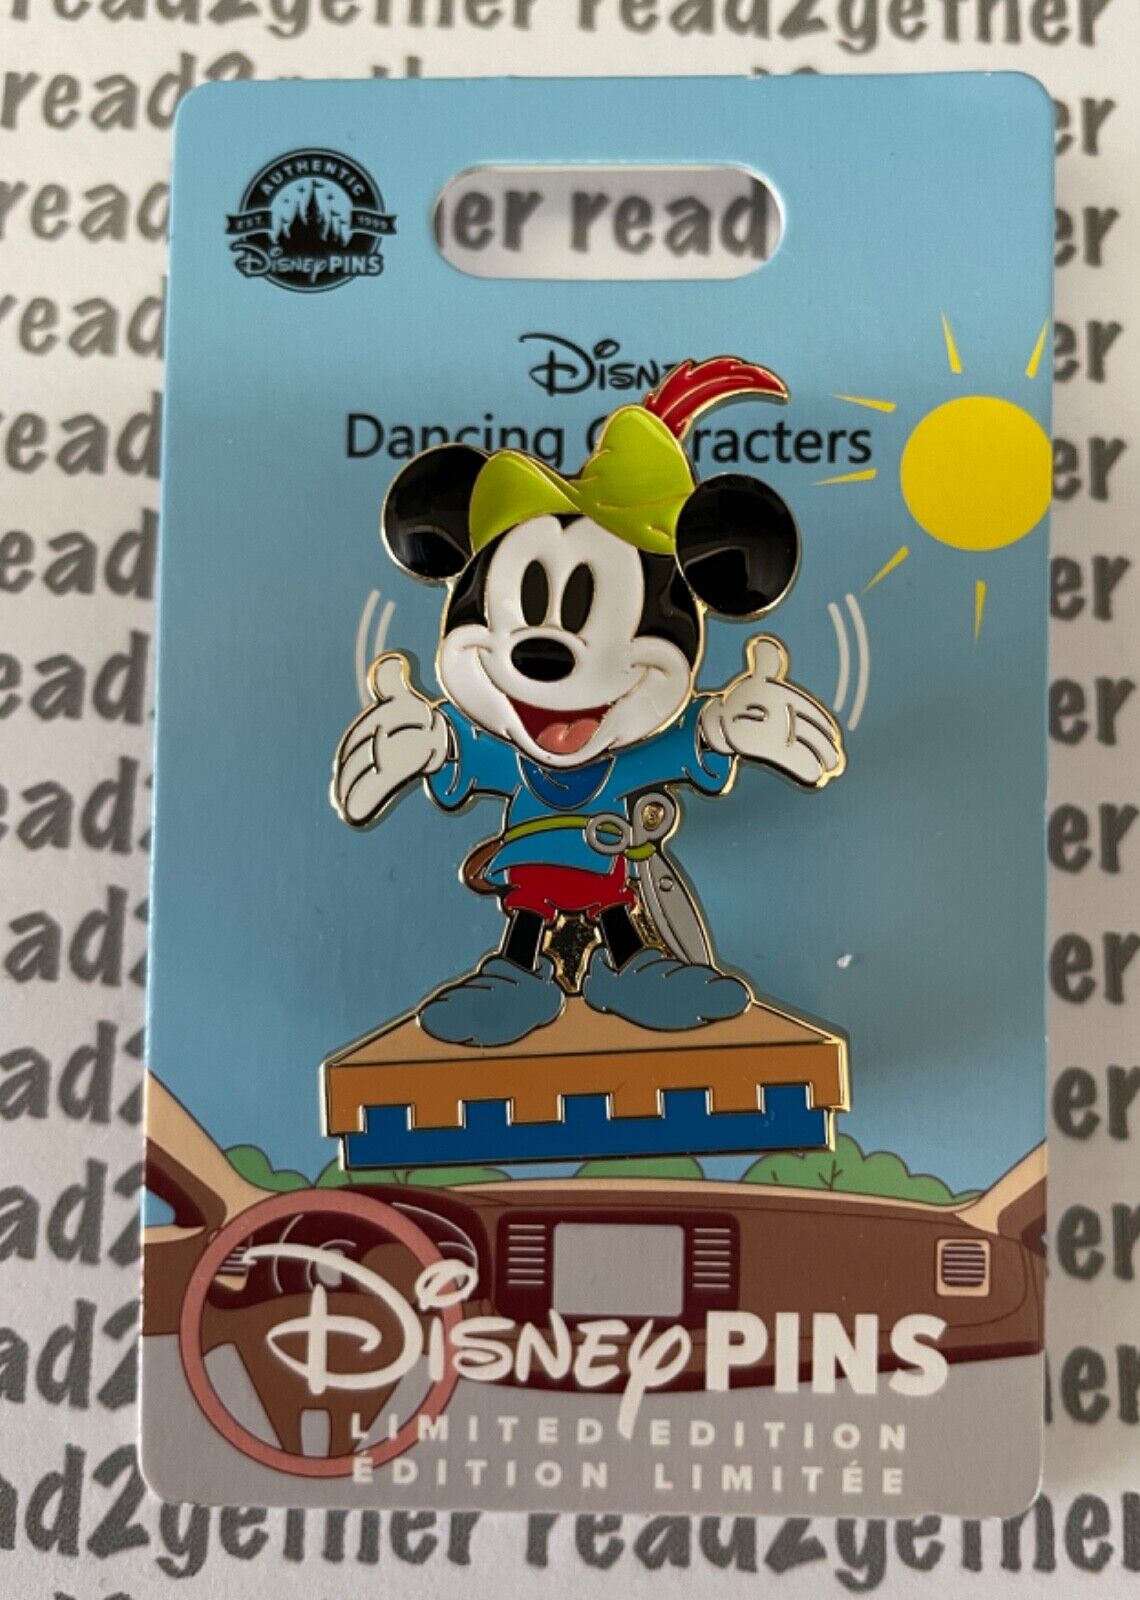 Disney Pin Dancing Characters Mickey Brave Little Tailor